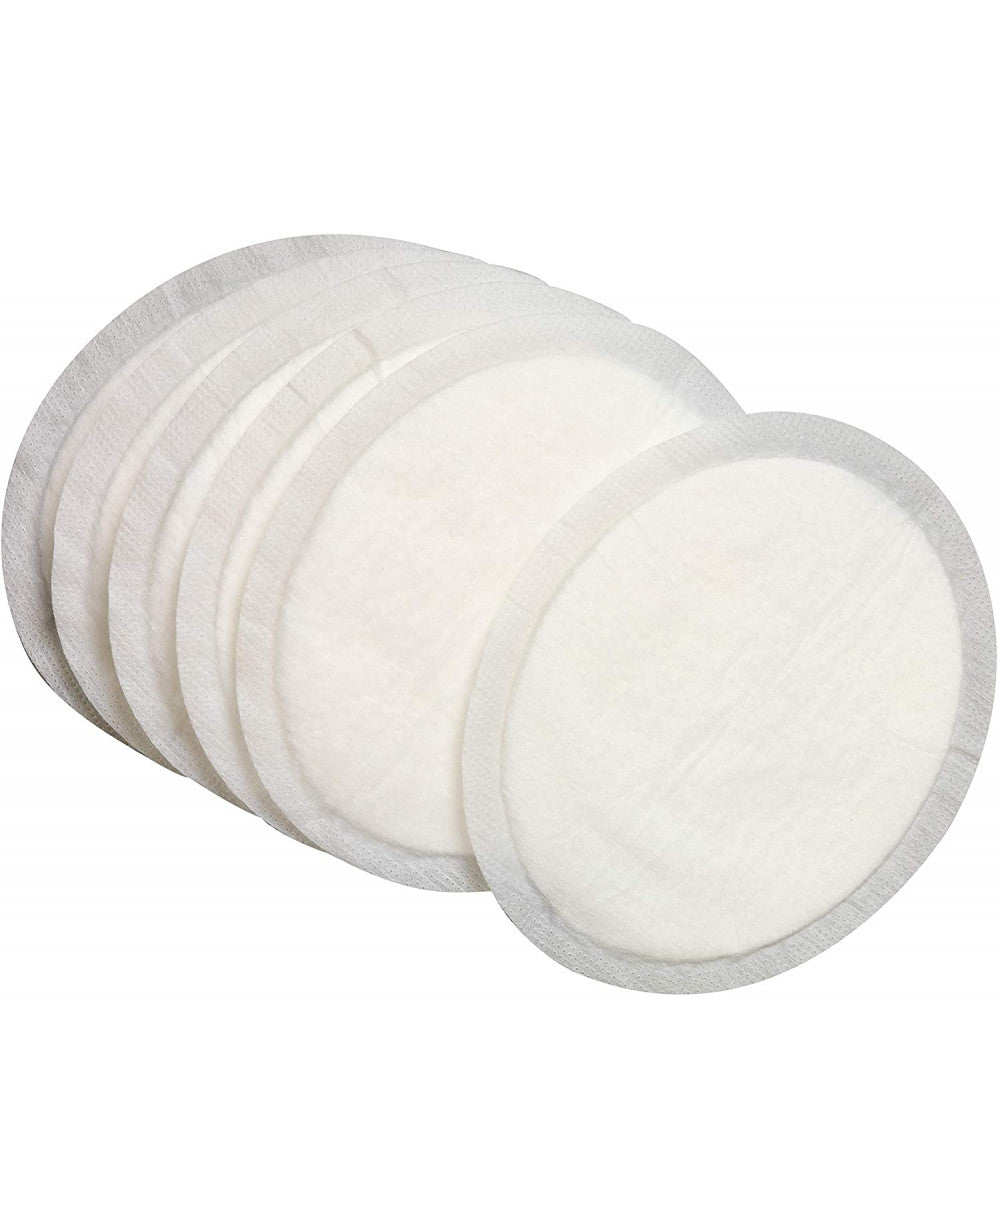 Dr. Brown's Disposable Breast Pads - 30 / 60 -Count